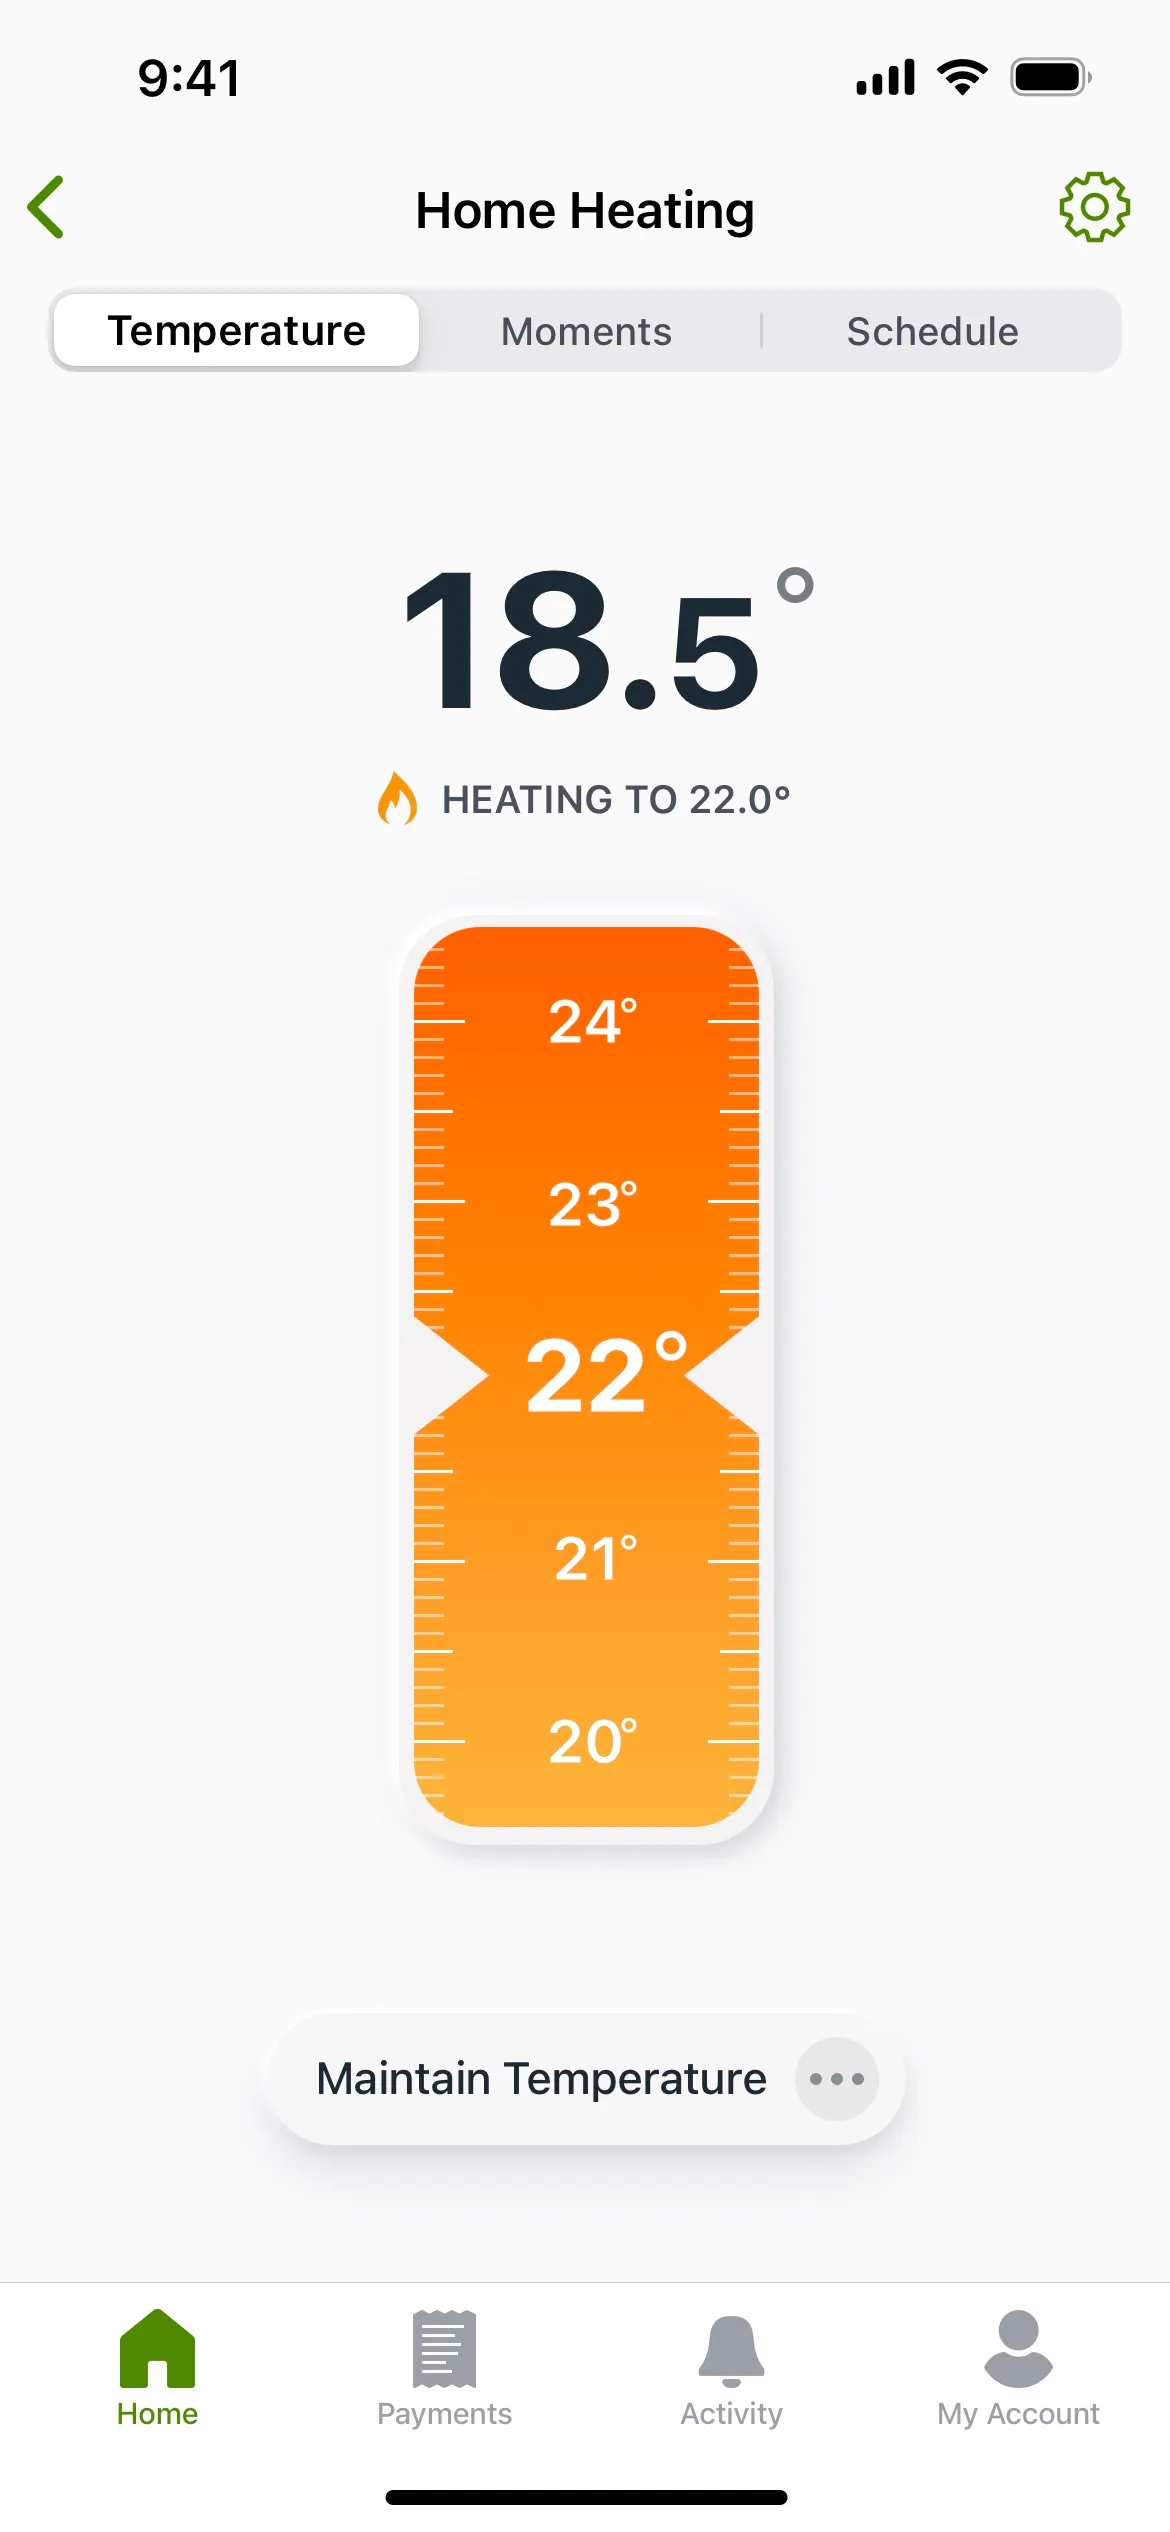 Image displaying a smartphone interface for a home heating control app. The screen shows the current temperature as 18.5 degrees Celsius with an indicator that the heating is set to increase to 22.0 degrees. A vertical slider with temperatures from 20 to 24 degrees allows for adjustment of the target temperature. Below the slider is a 'Maintain Temperature' button. The top of the app has tabs for 'Temperature,' 'Moments,' and 'Schedule,' and the bottom features navigation buttons for 'Home,' 'Payments,' 'Activity,' and 'My Account.' The interface has a clean design with a white background and the temperature slider in shades of orange.